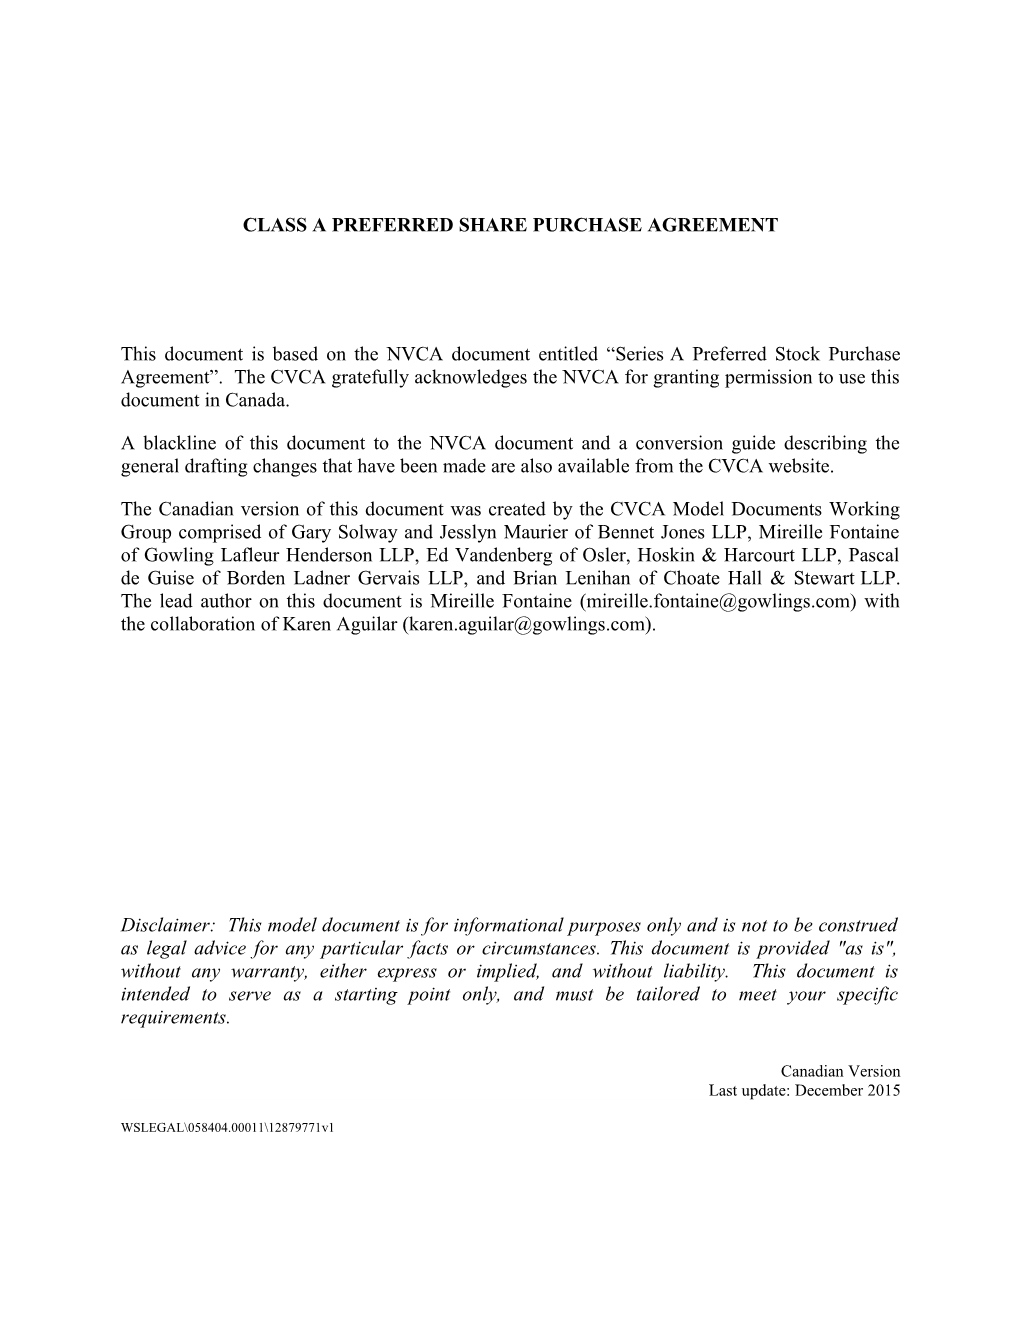 Class a Preferred Share Purchase Agreement